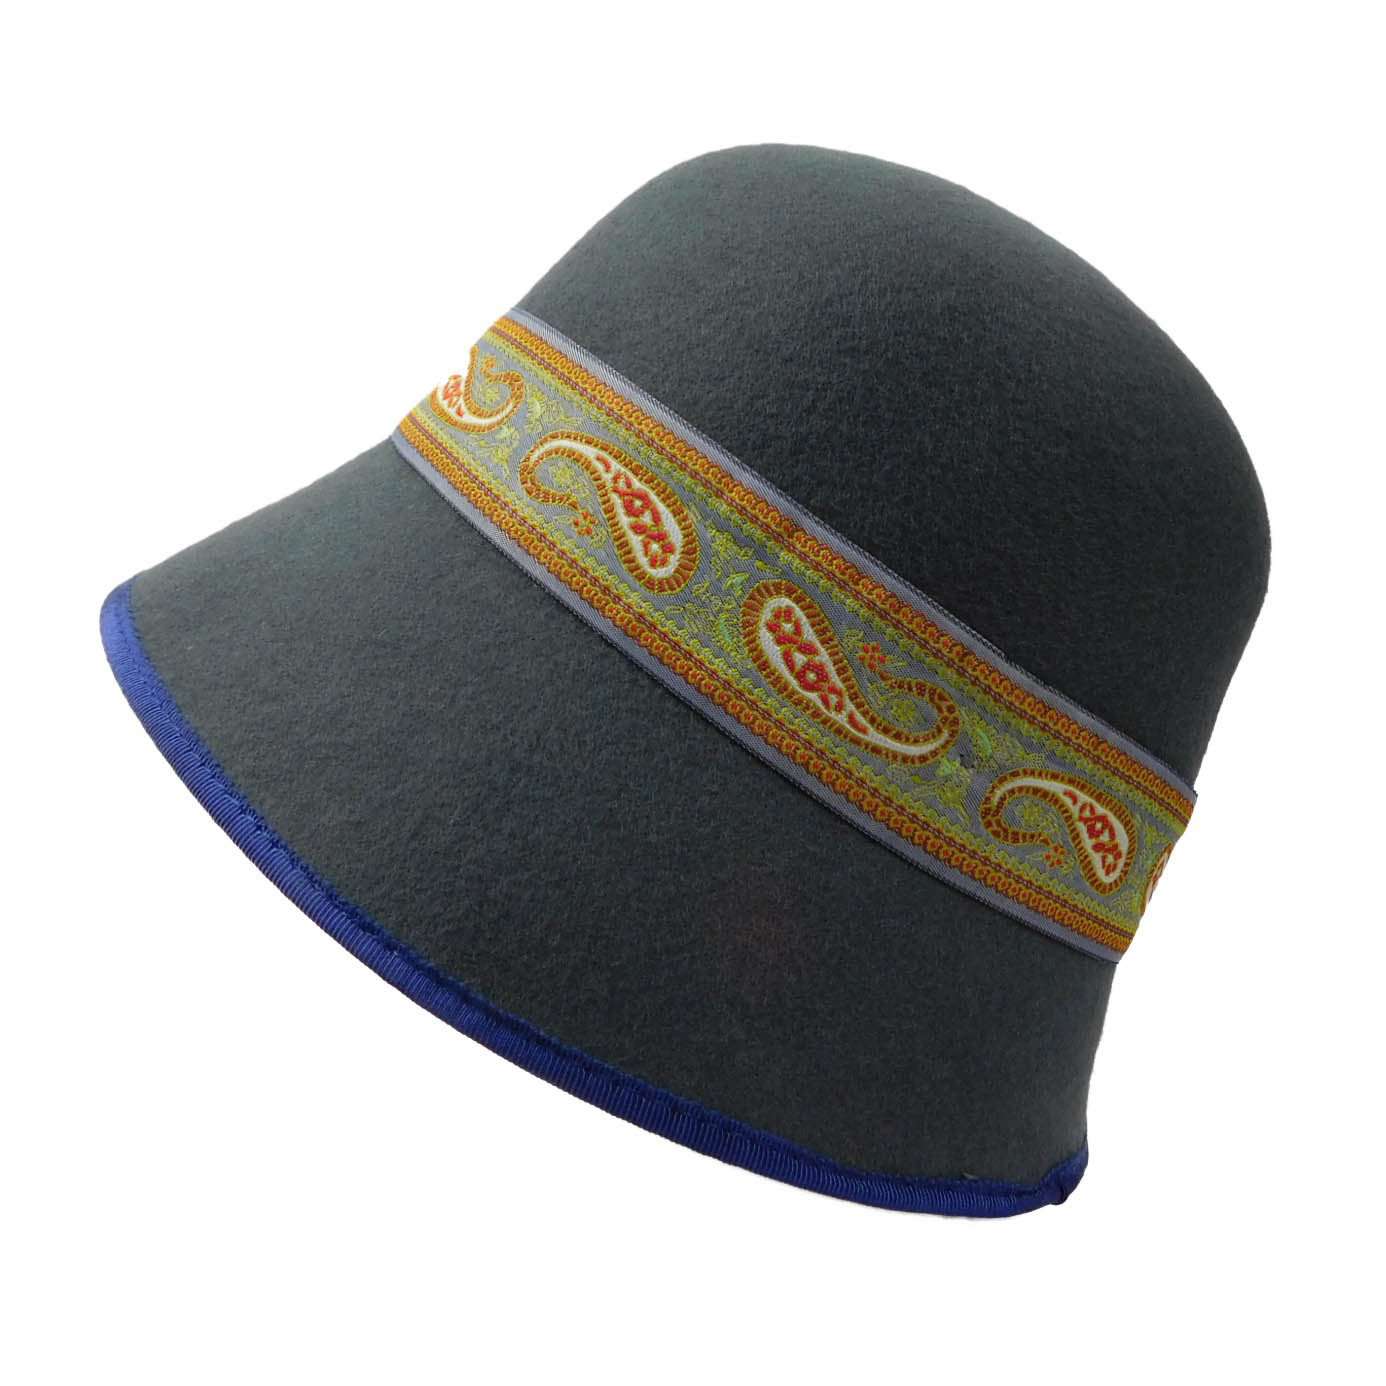 Black Wool Cloche with Paisley Band Cloche Jeanne Simmons    